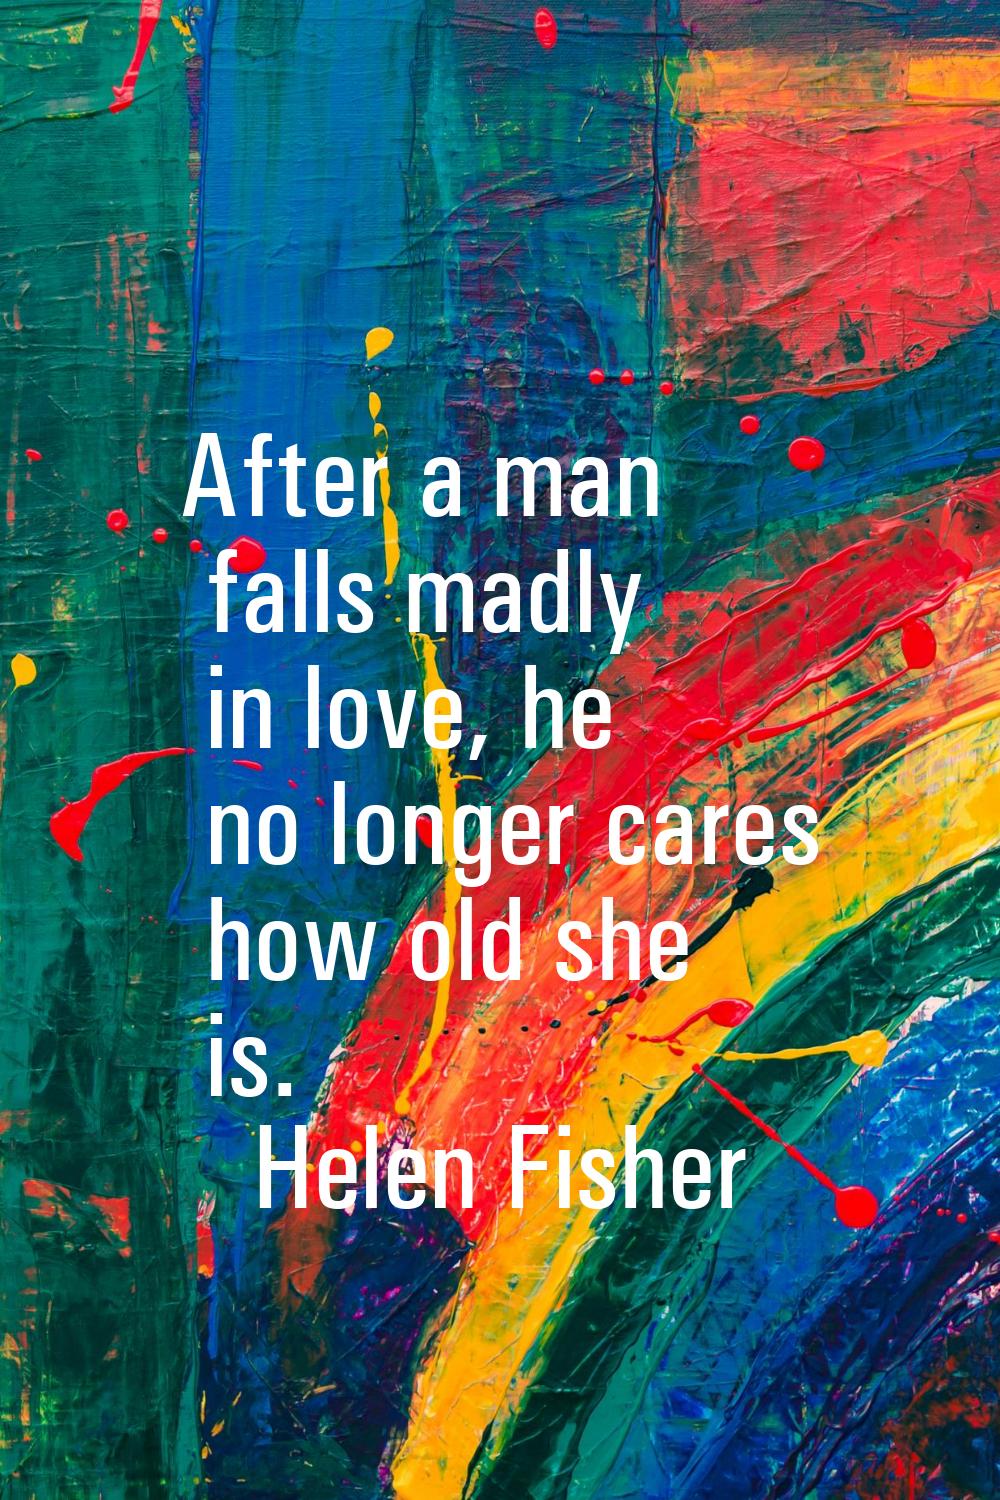 After a man falls madly in love, he no longer cares how old she is.